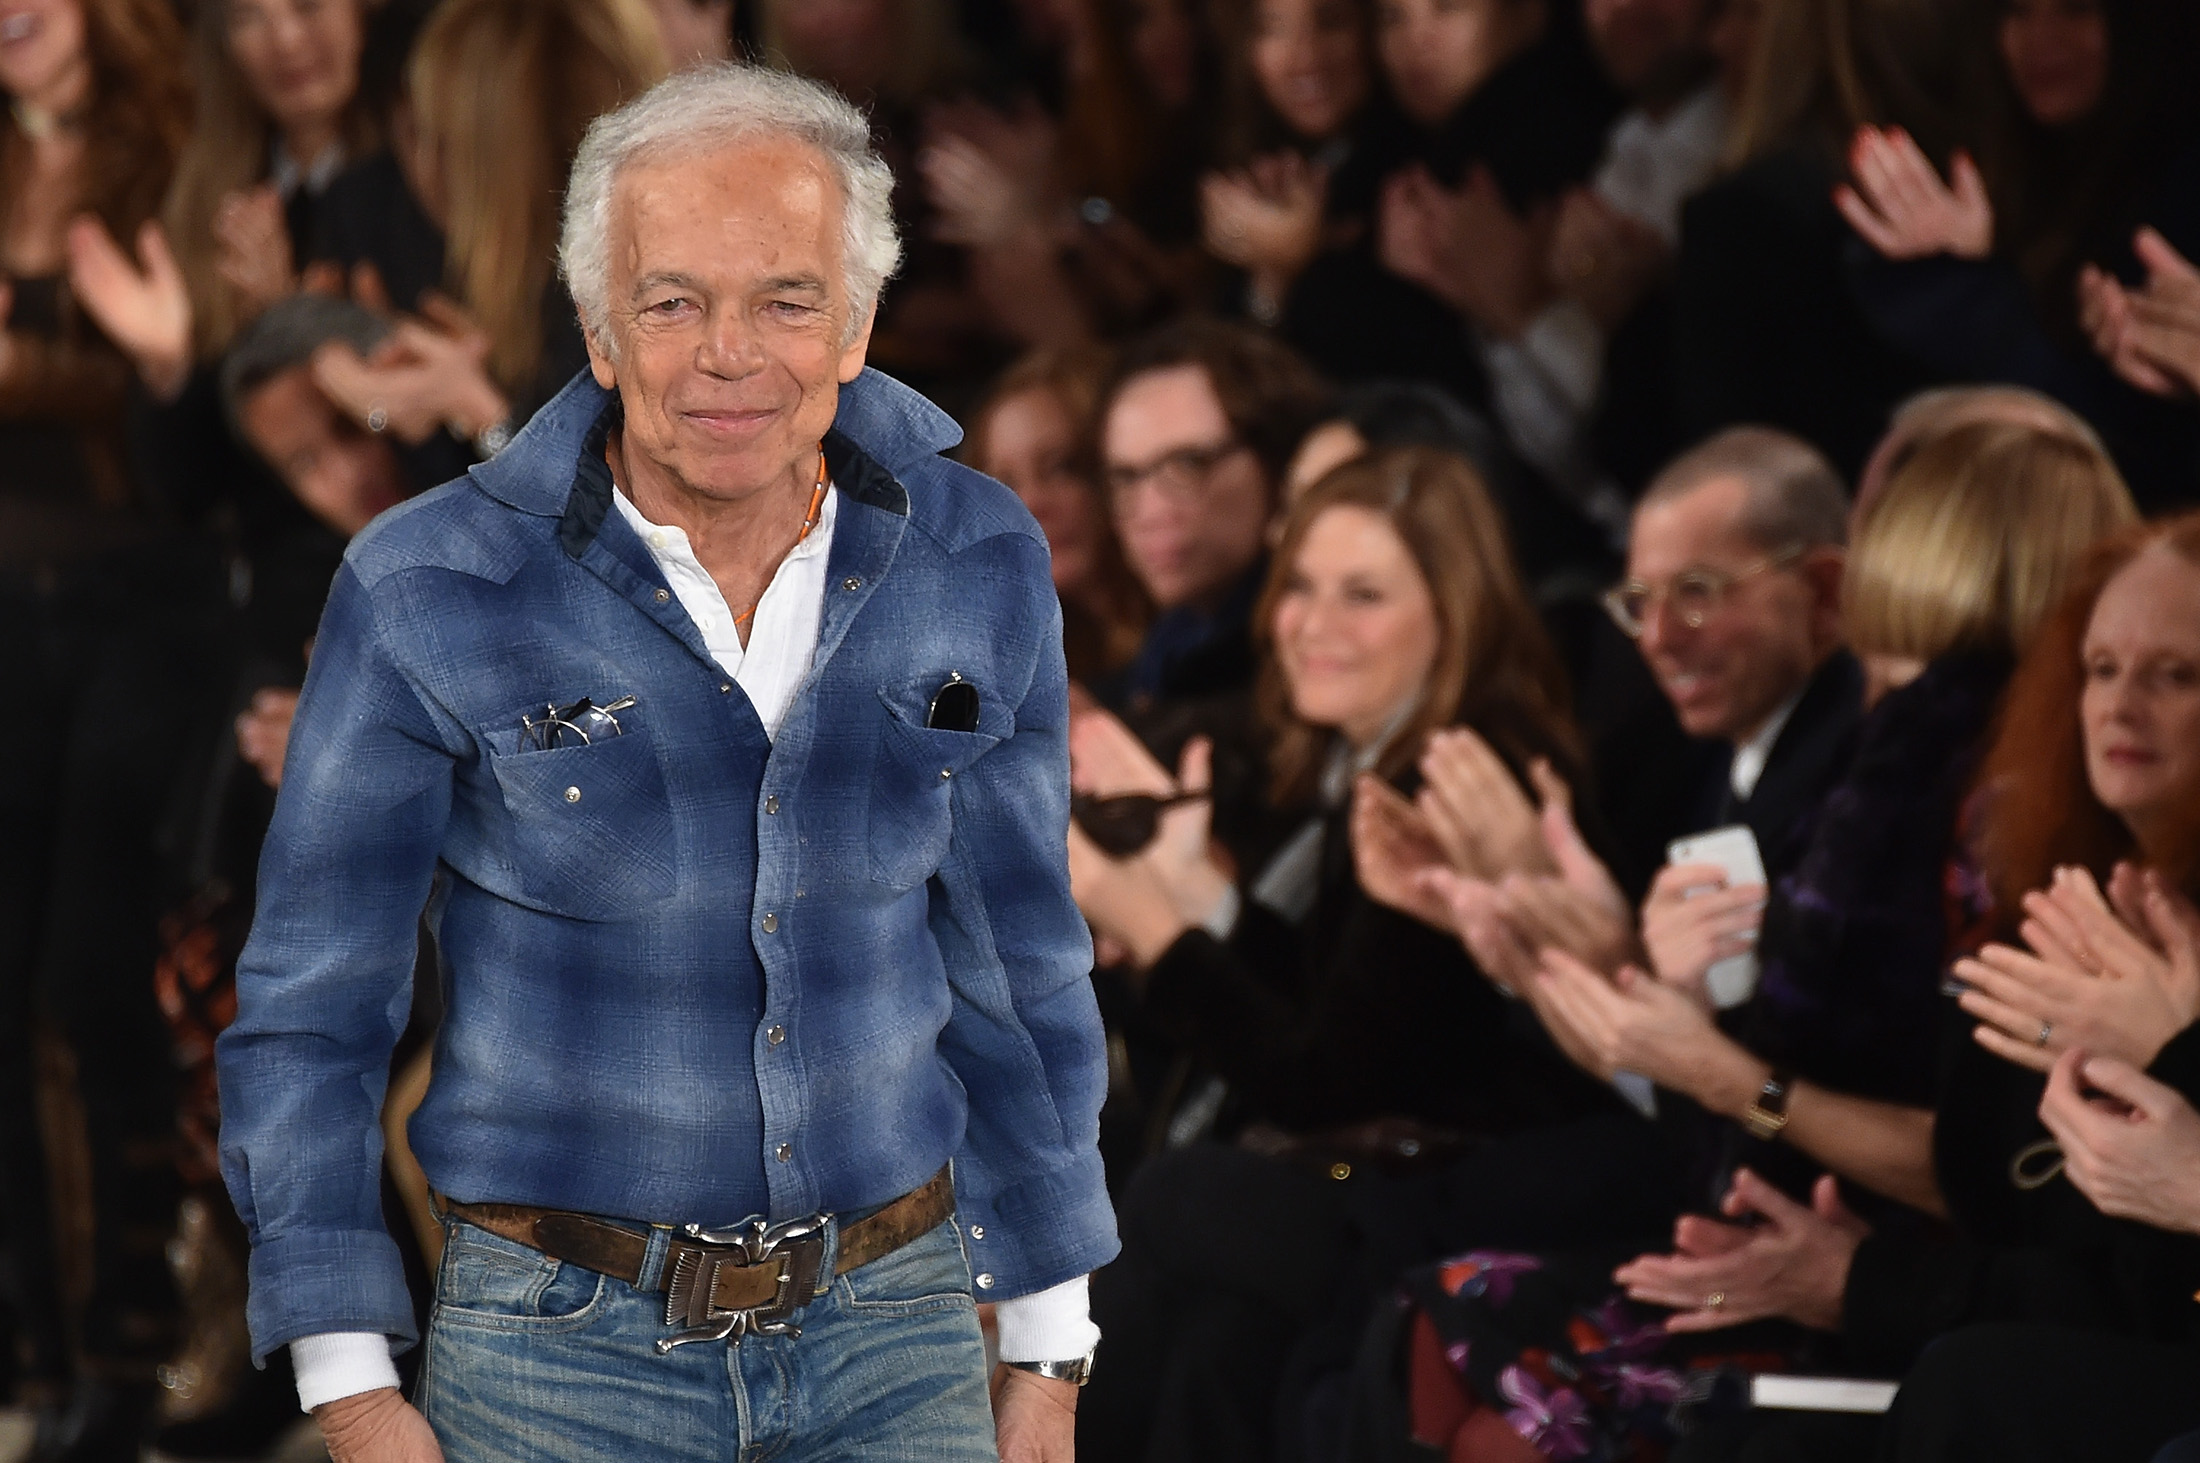 Ralph Lauren CEO to leave amid dispute over future direction